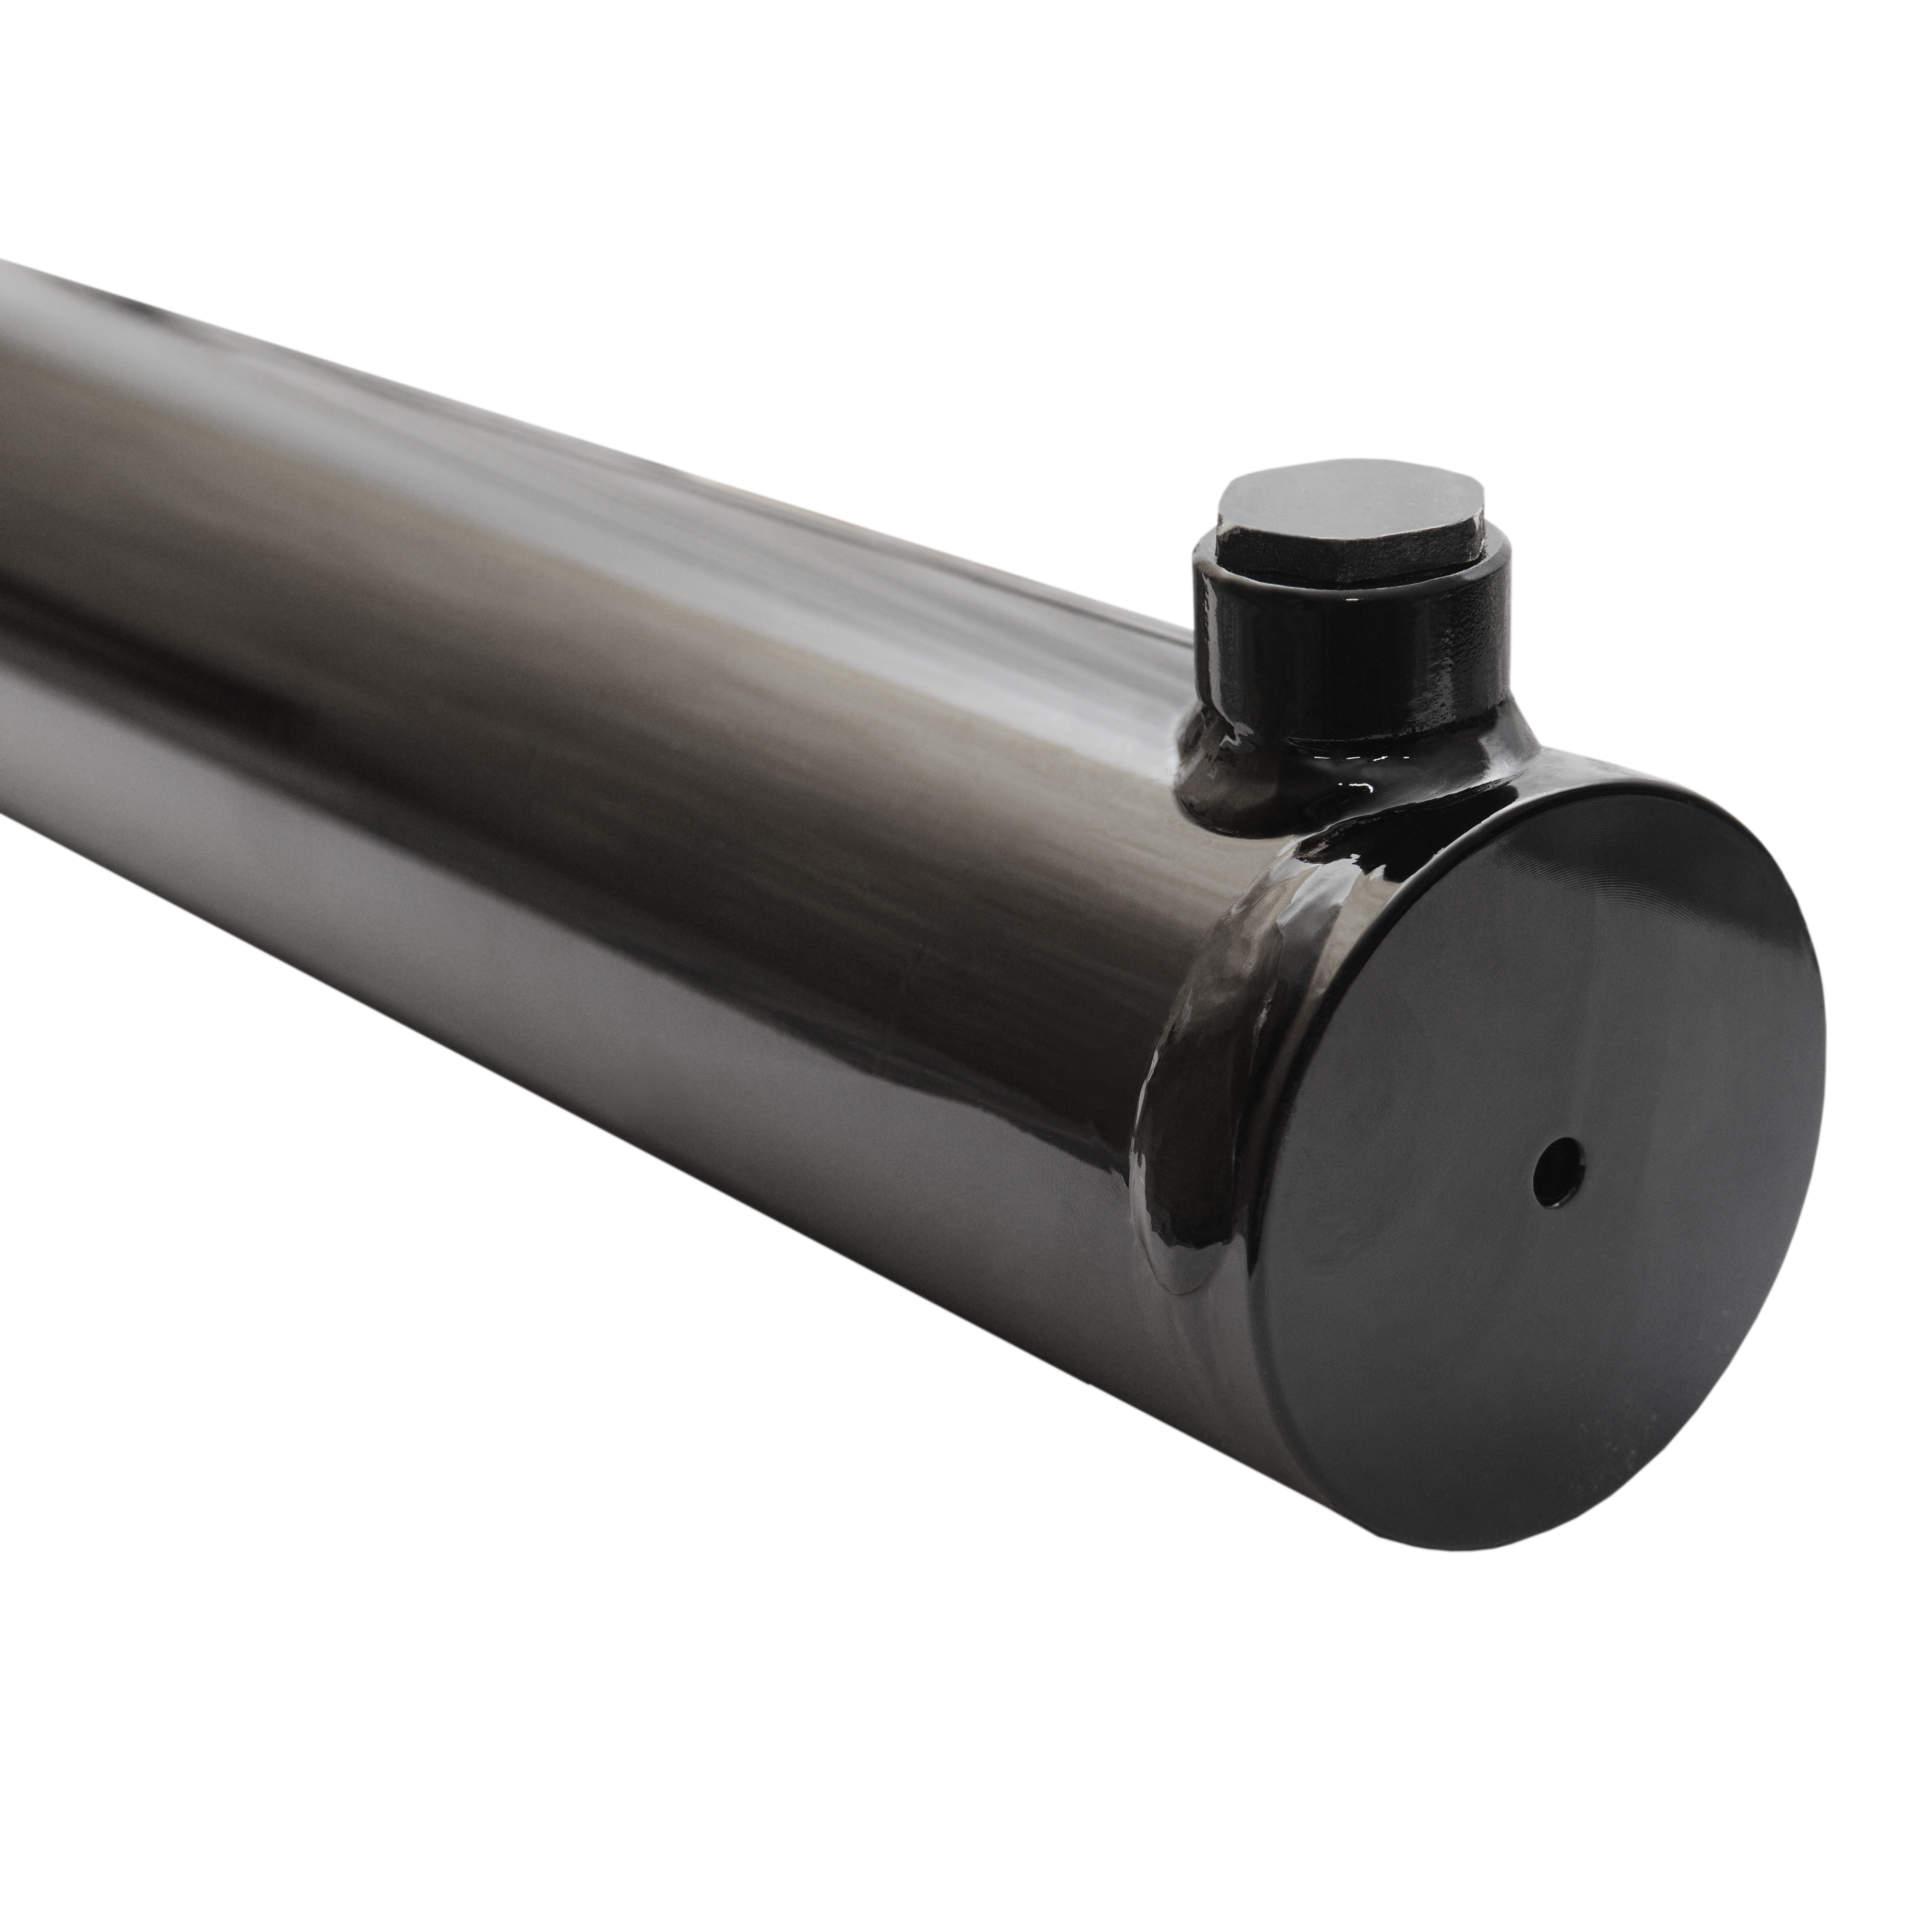 2.5 bore x 20 stroke hydraulic cylinder, welded universal double acting cylinder | Magister Hydraulics